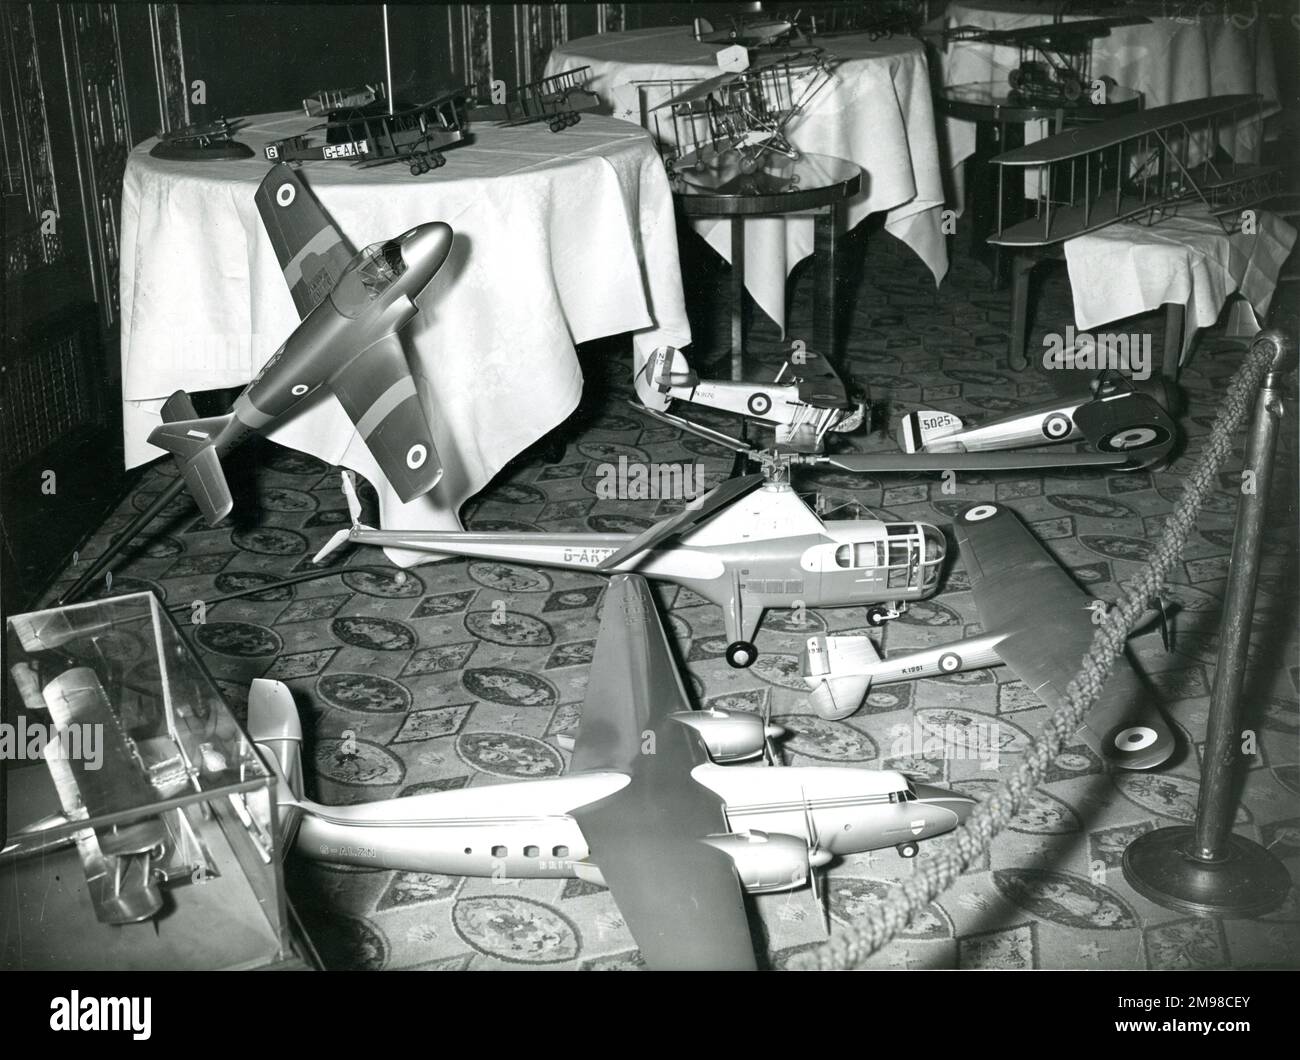 Aircraft models on display at the Dorchester Hotel, London, on 17 December 1953 at a Dinner honouring the 50th anniversary of the first powered controlled flights by the Wright brothers. The dinner was given by the Royal Aeronautical Society and the Royal Aero Club. Stock Photo